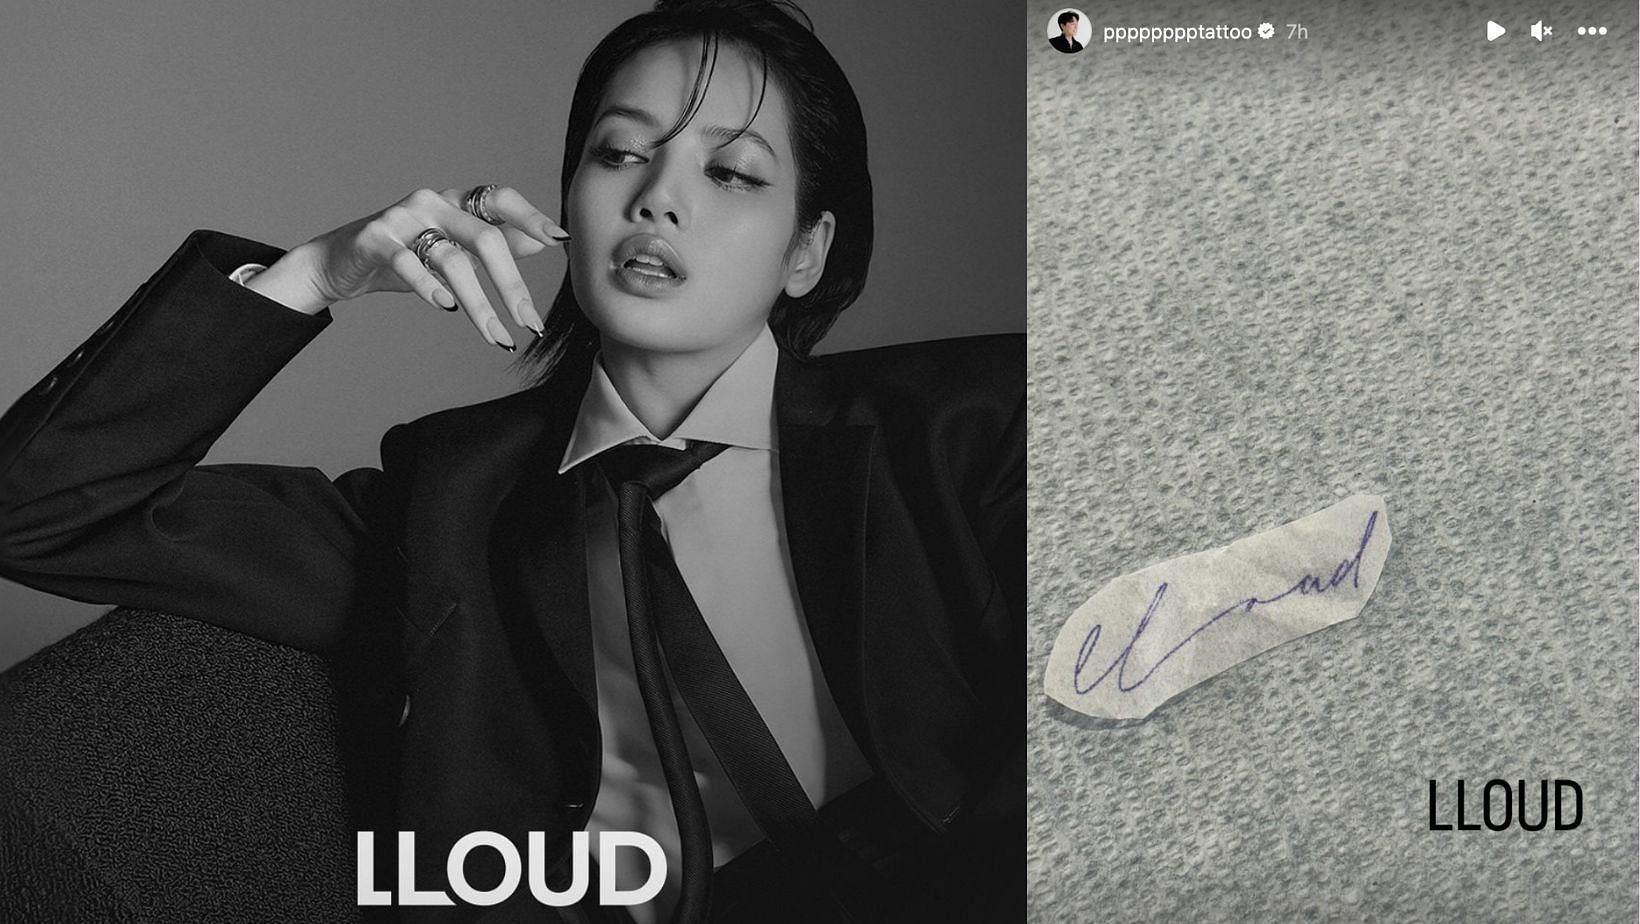 BLACKPINK member&rsquo;s tattoo artist sharing &lsquo;LLOUD&rsquo; stencil on Instagram fuel speculations. (Images via Instagram/@wearelloud &amp; @pppppppptattoo)